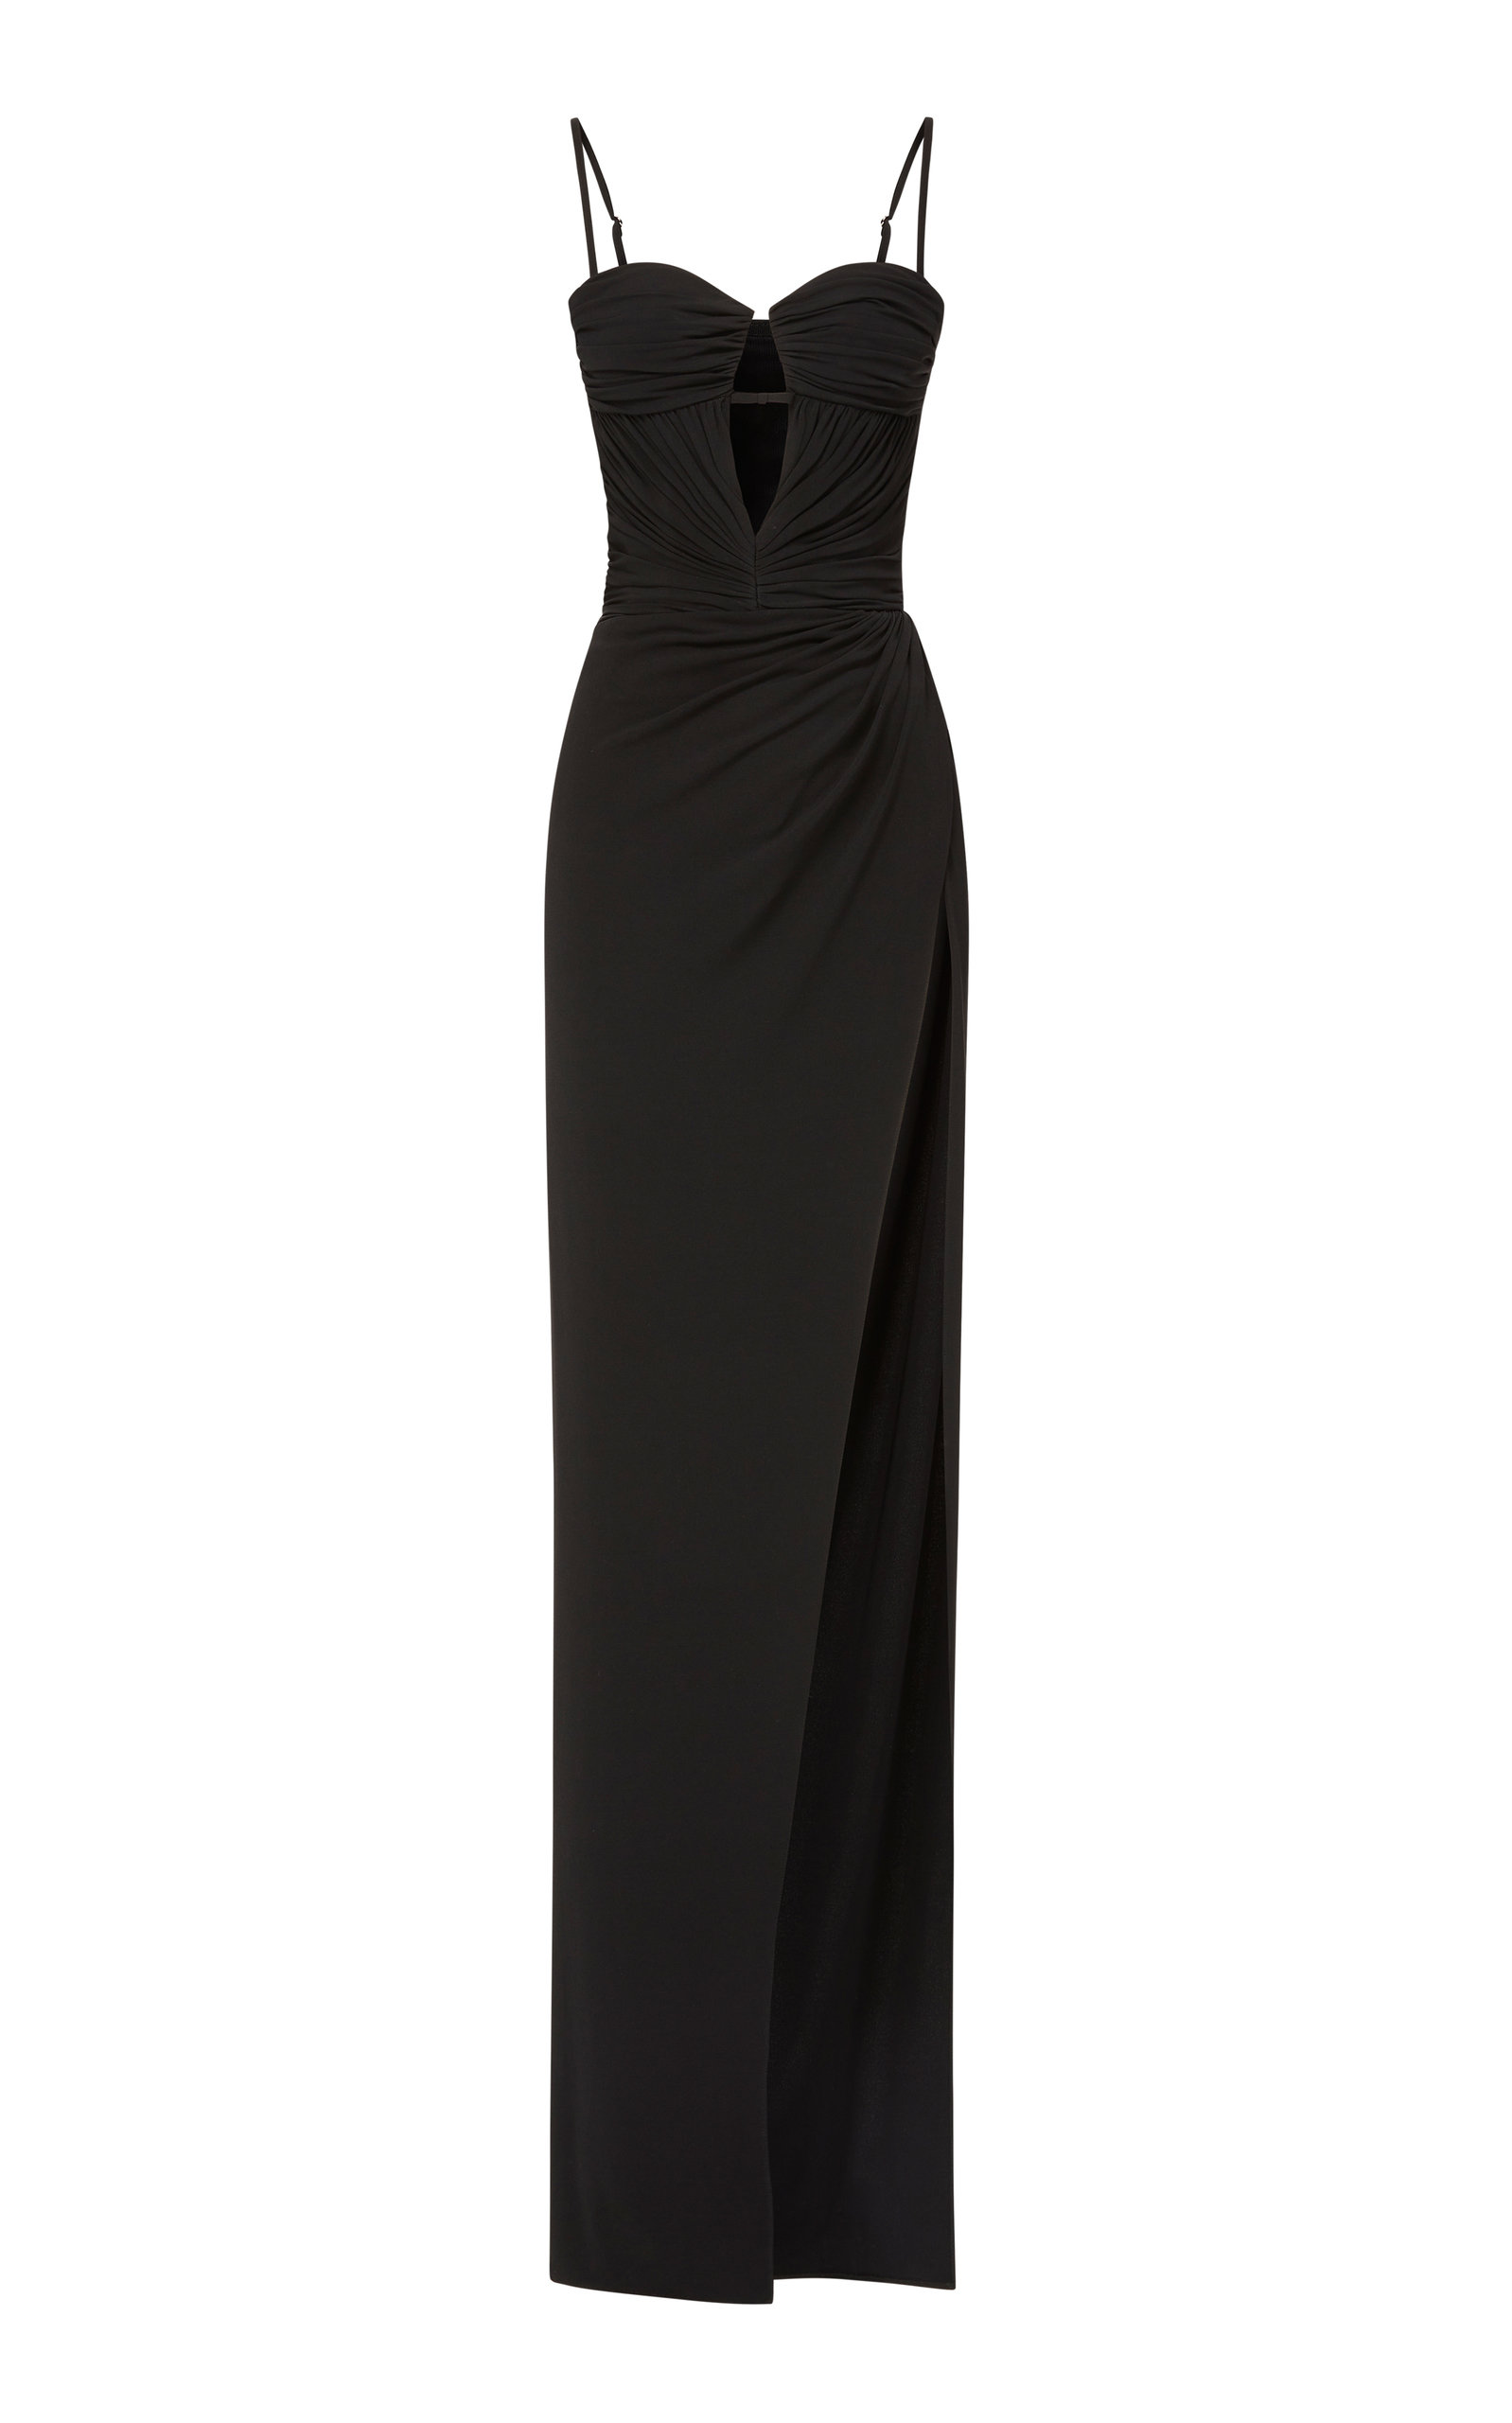 BRANDON MAXWELL BOW-DETAILED JERSEY WRAP GOWN